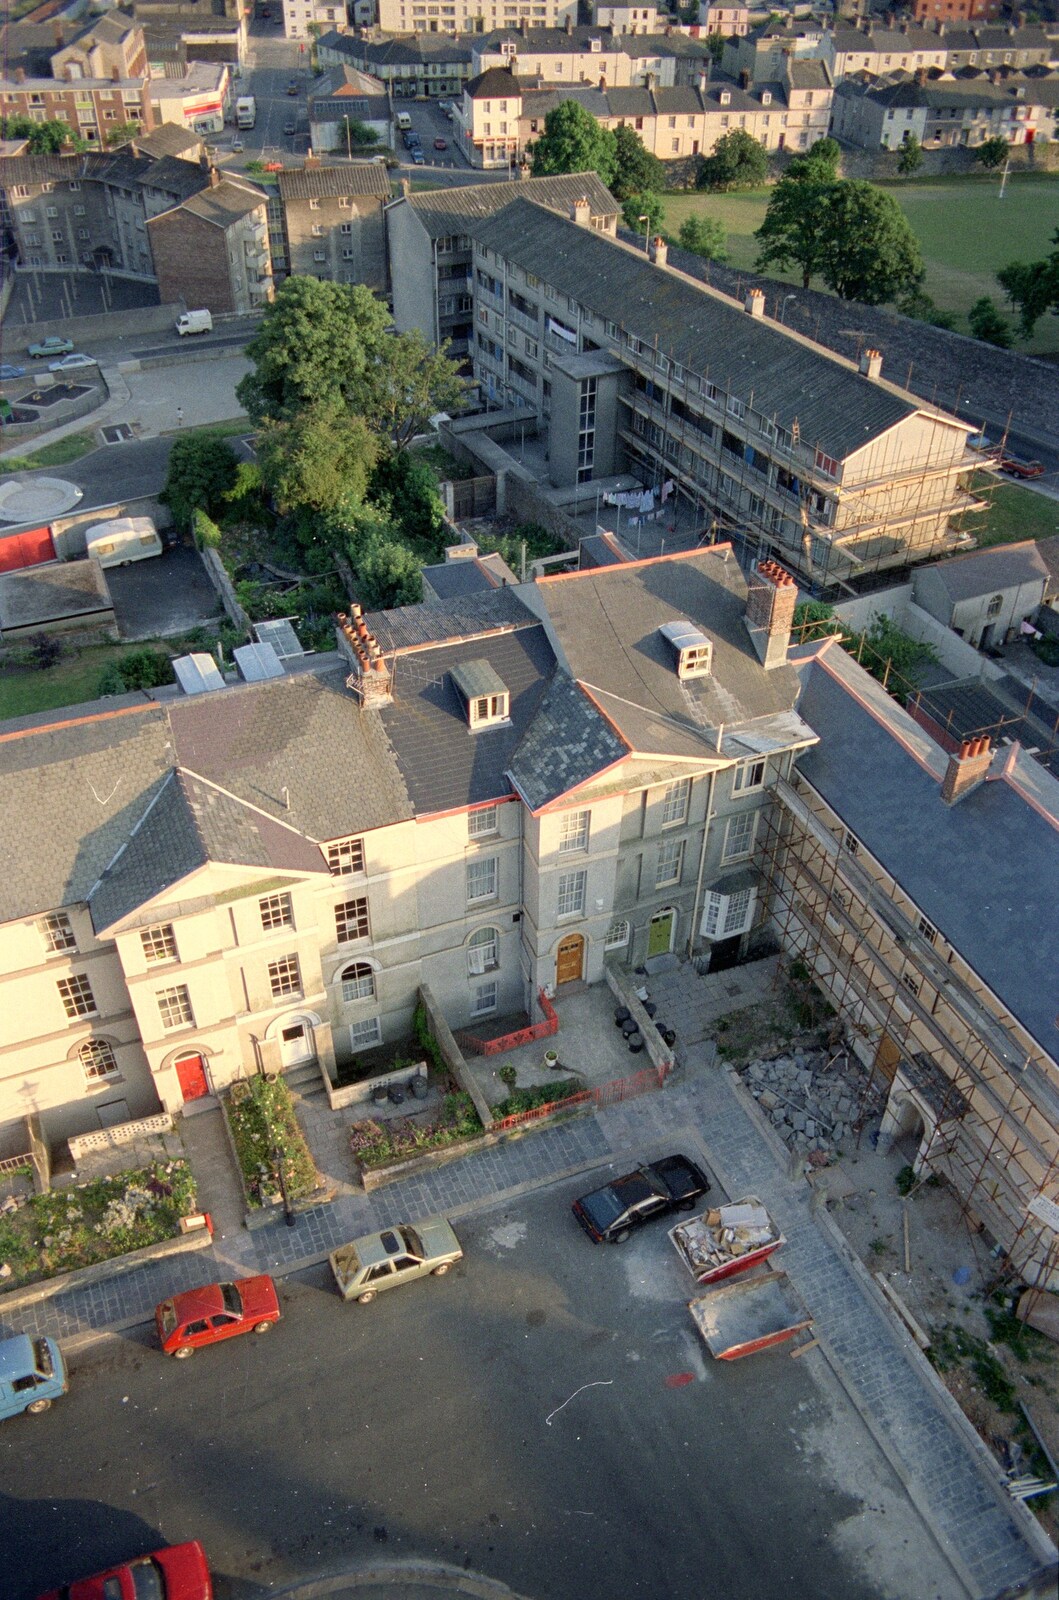 Our corner of Wyndham Square from Uni: Views From St. Peter's Church Tower, Wyndham Square, Plymouth, Devon - 15th June 1989